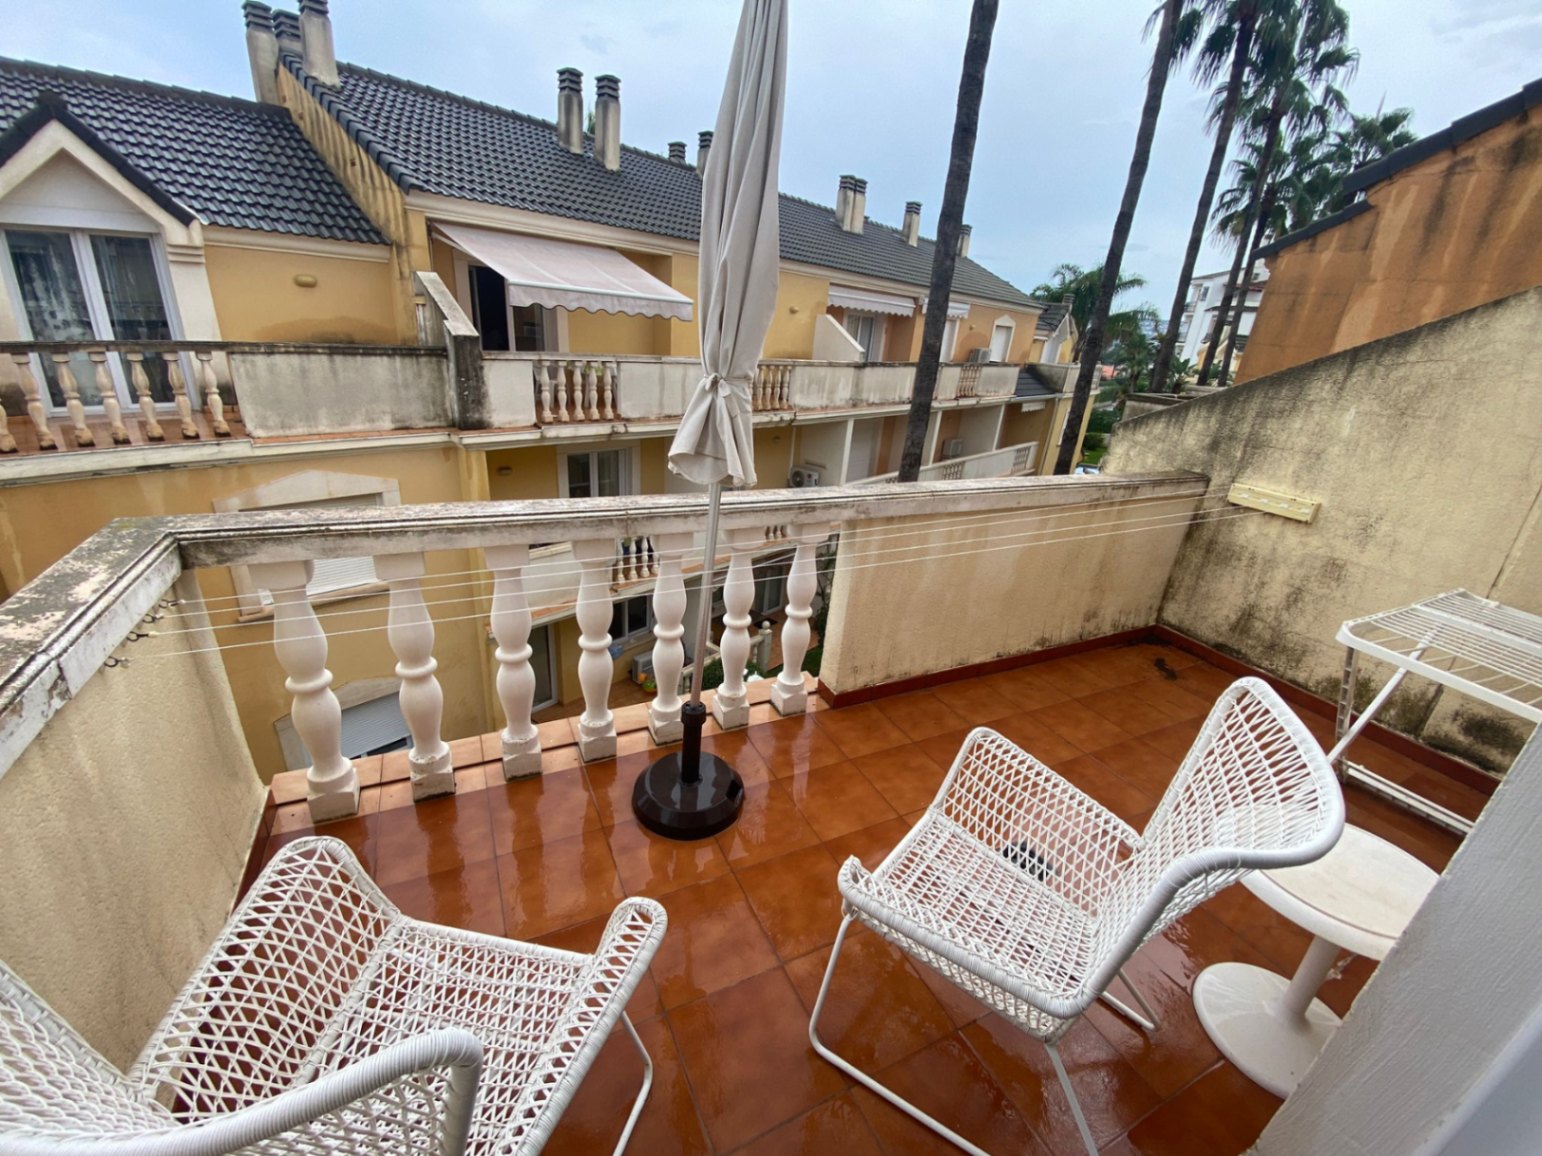 Magnificent townhouse next to the beach and close to the city. Very large garage.